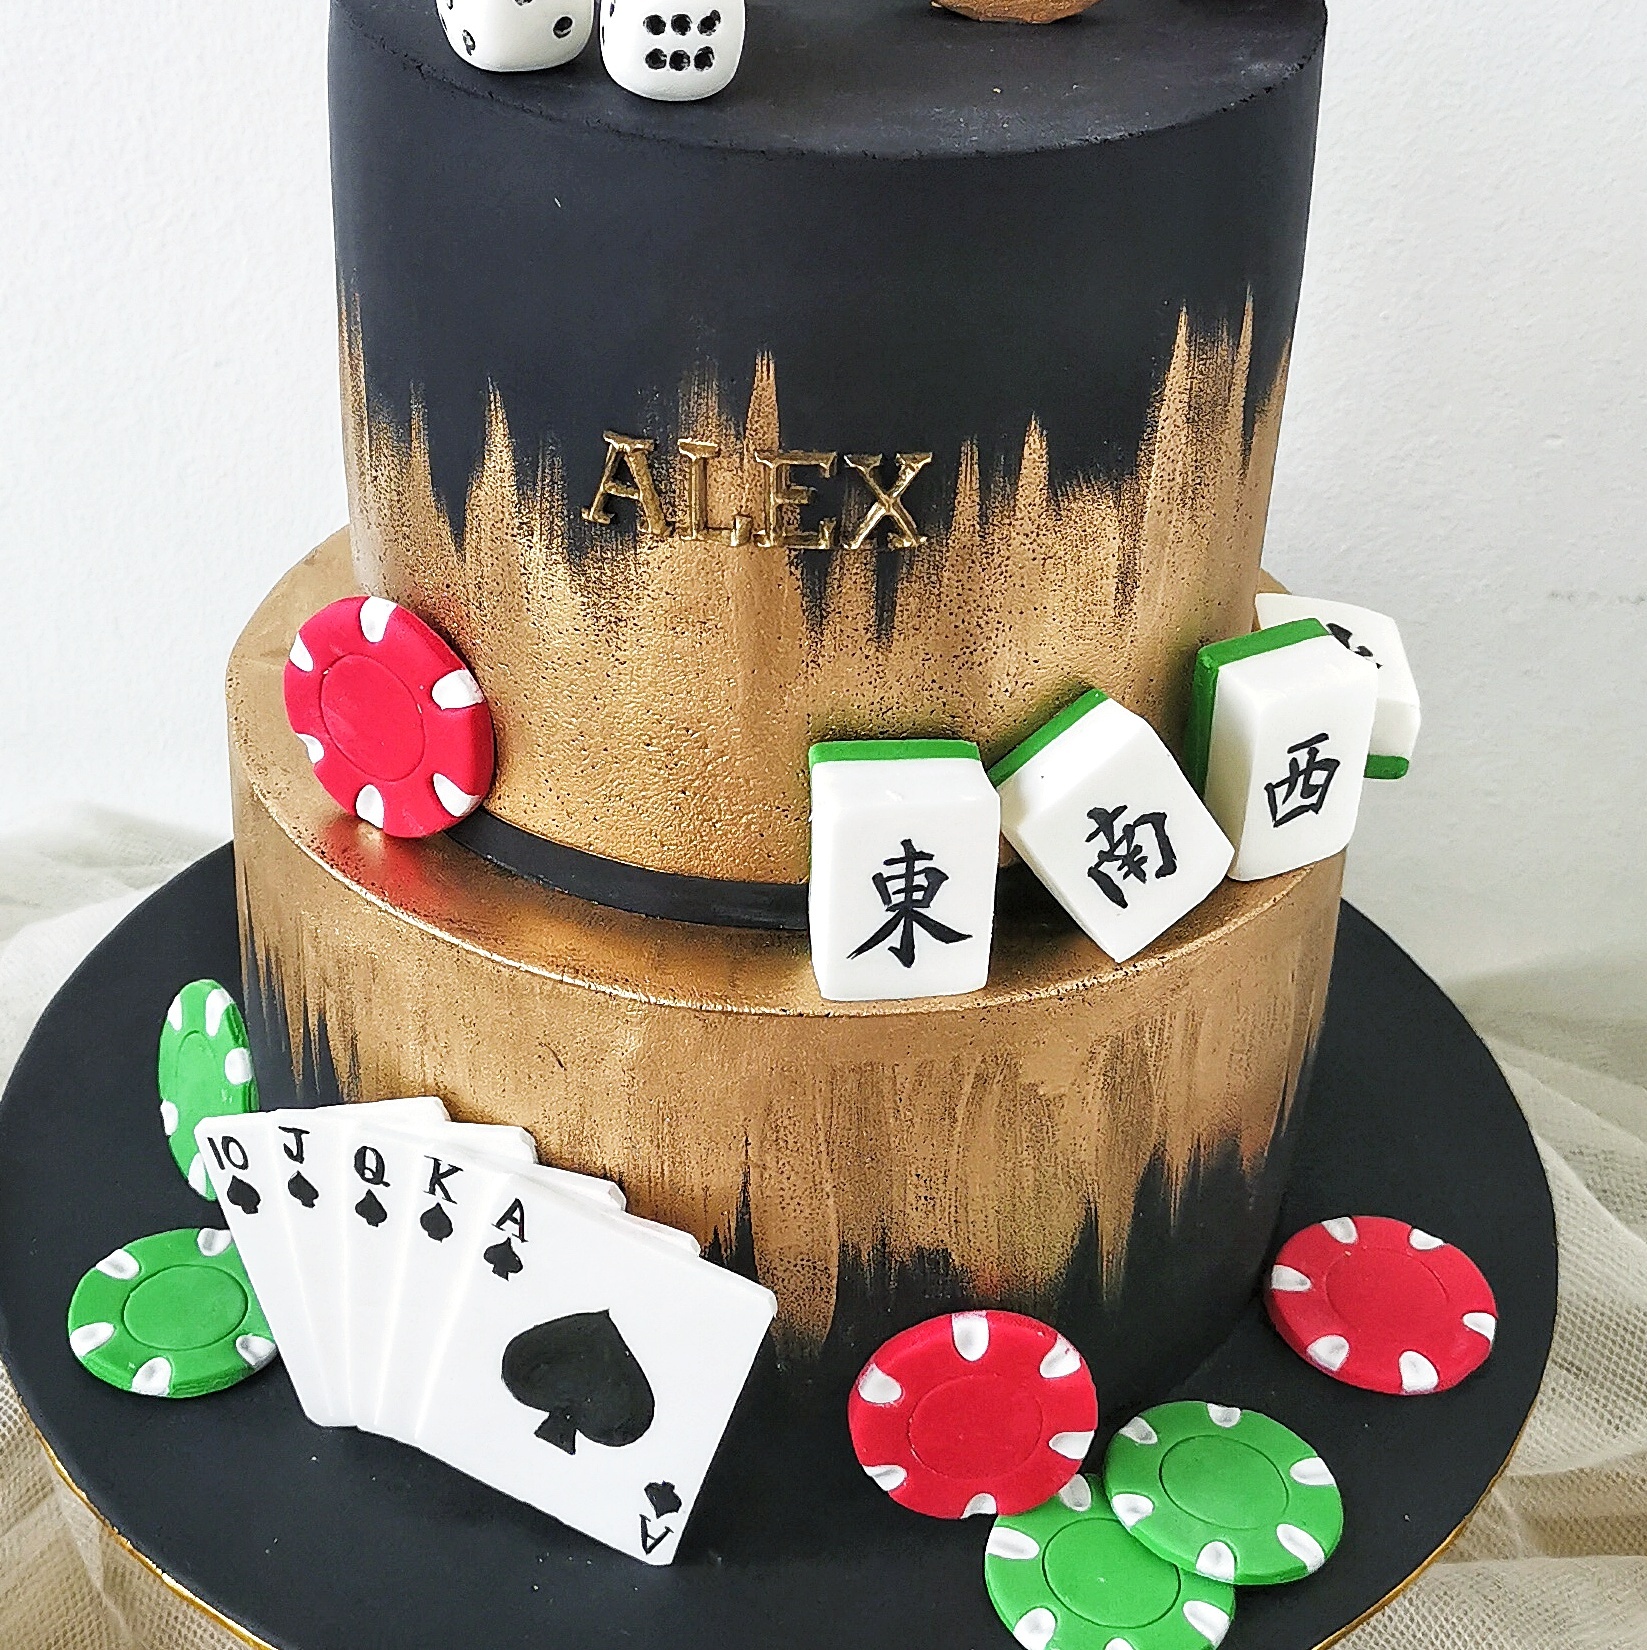 Casino Cakes - 30 Awesome Gambling Cakes To Die For